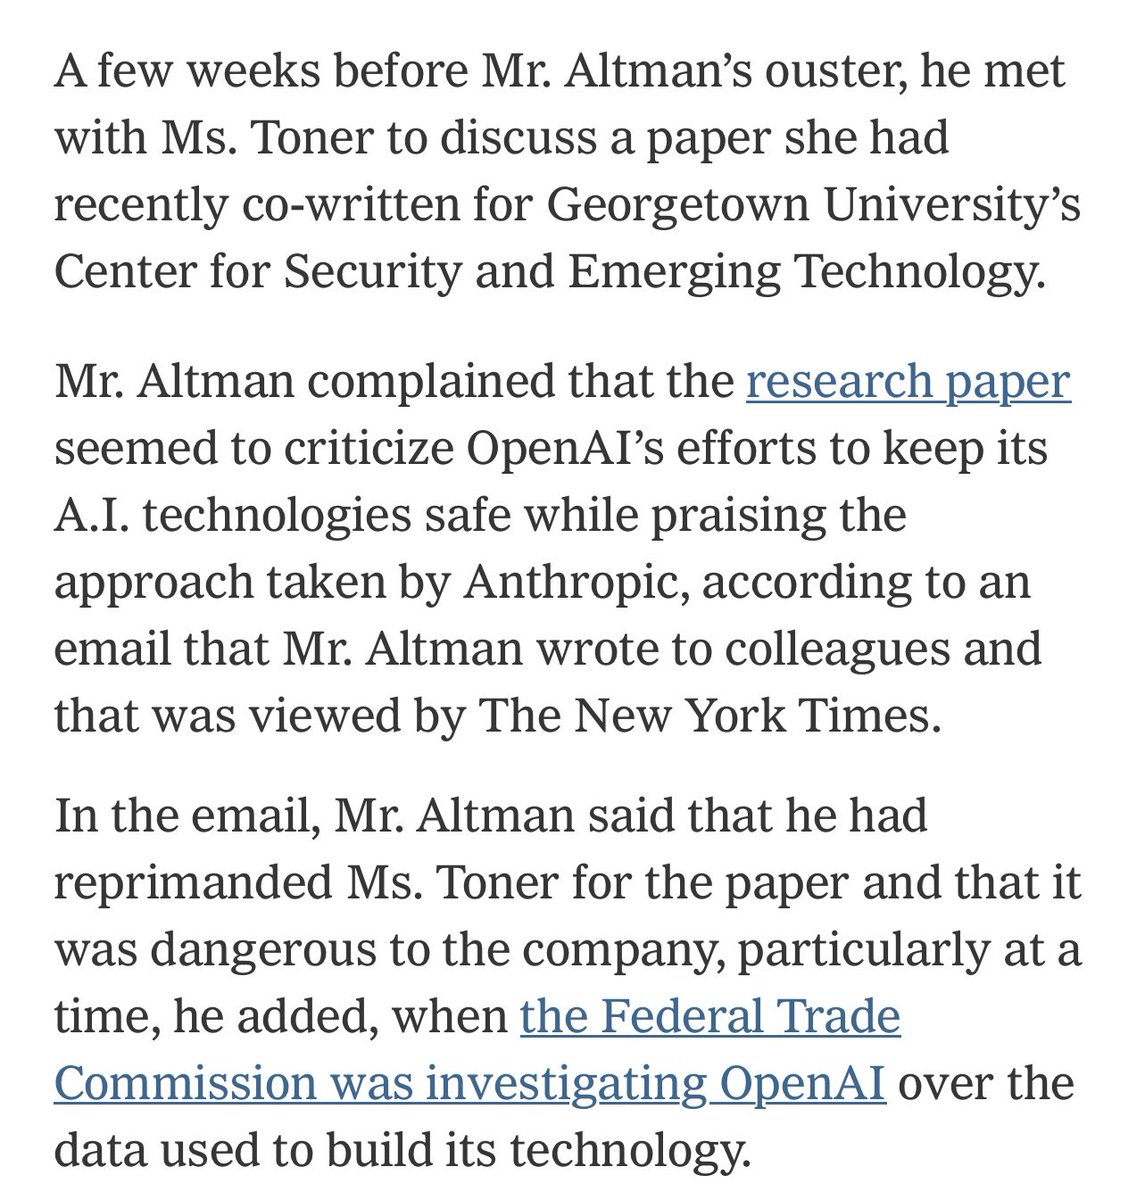 Appears Helen Toner was instrumental in removing Altman from the board No mention of Adam in the article